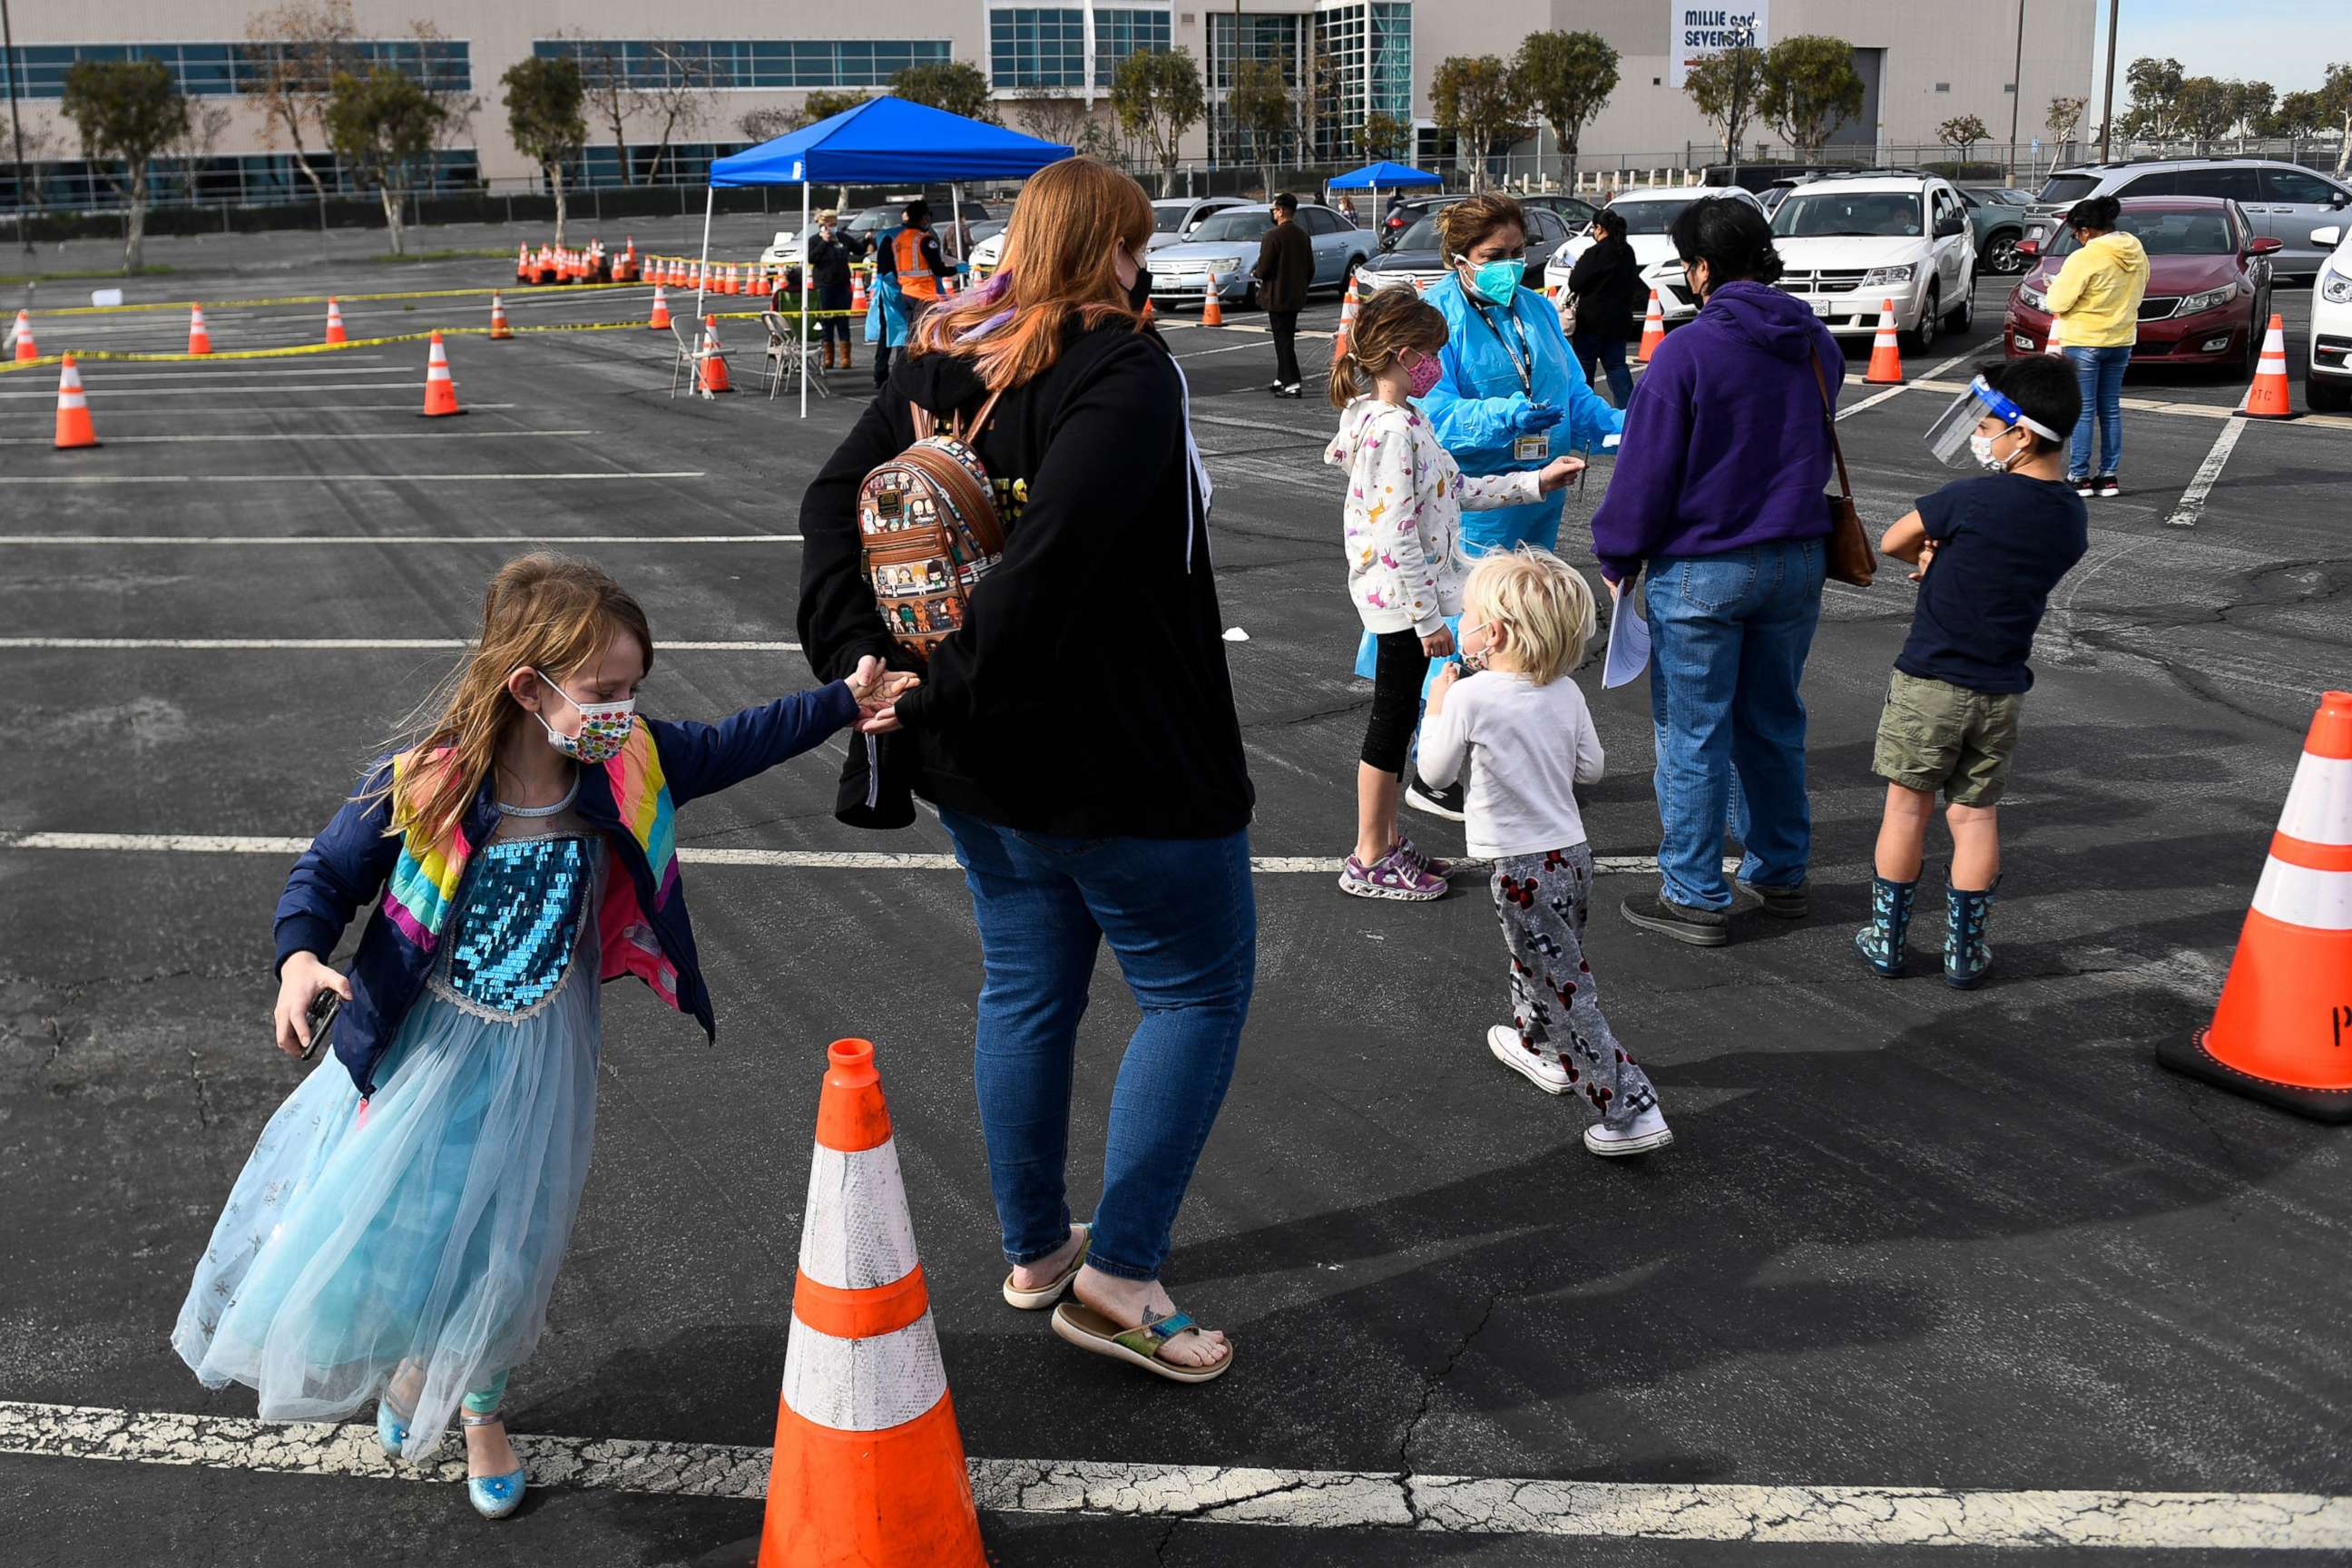 PHOTO: People with children sign up to receive rapid Covid-19 tests at a Long Beach Public Health Department testing site in the parking lot of a former Boeing aircraft factory, Jan. 10, 2022, in Long Beach, Calif.